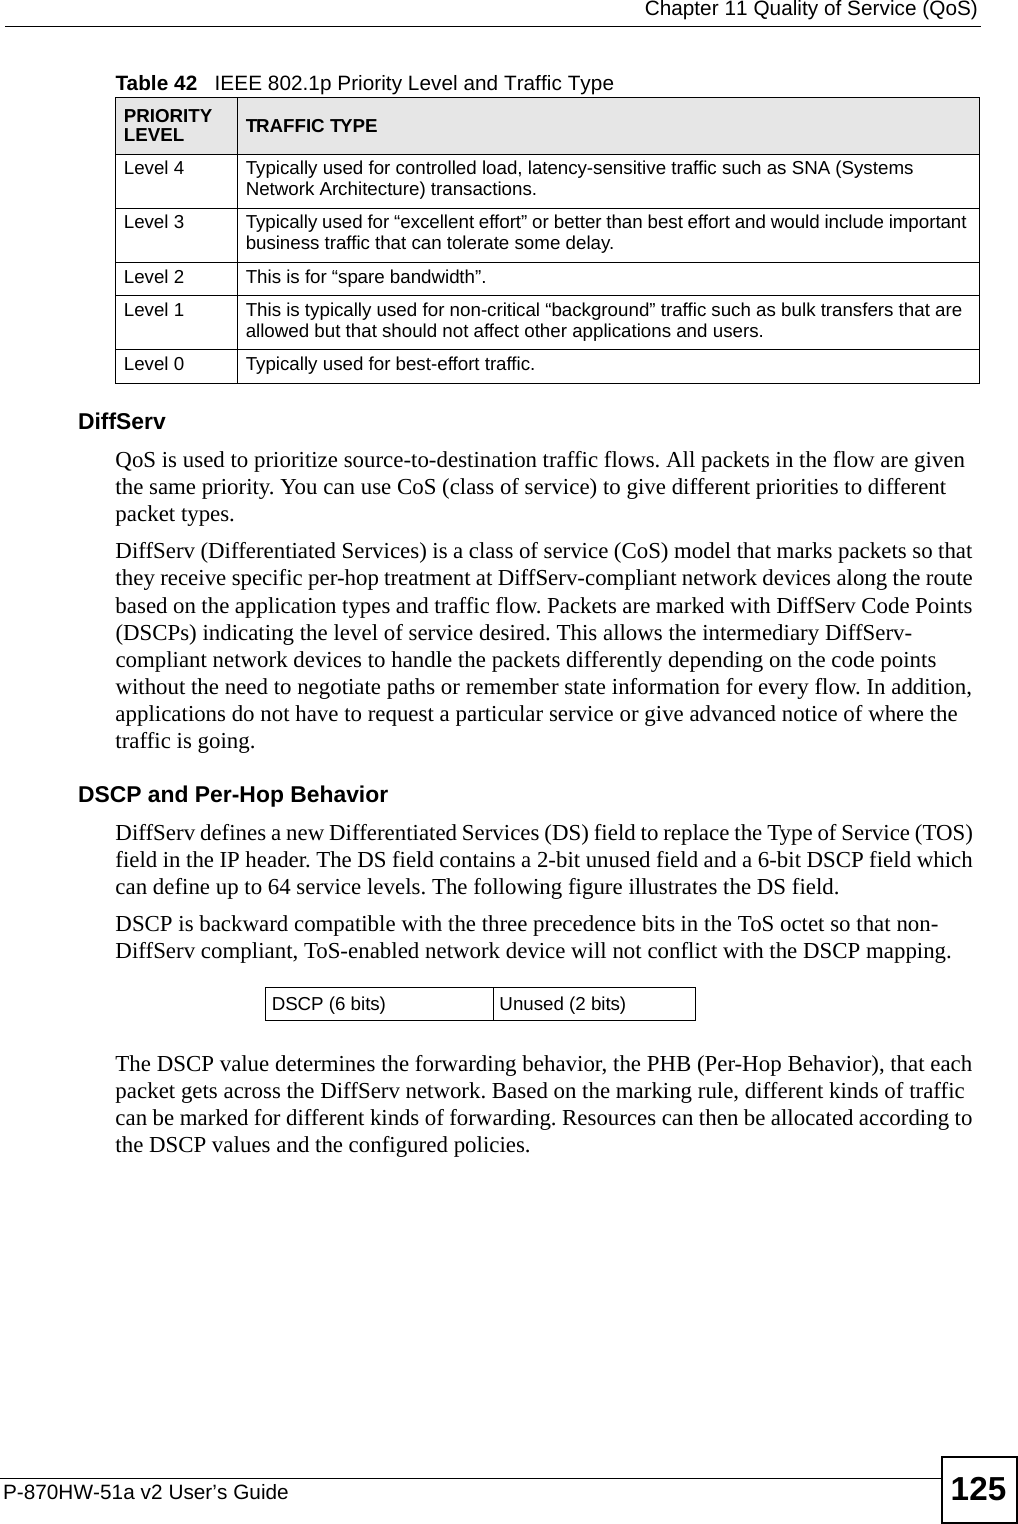  Chapter 11 Quality of Service (QoS)P-870HW-51a v2 User’s Guide 125DiffServ QoS is used to prioritize source-to-destination traffic flows. All packets in the flow are given the same priority. You can use CoS (class of service) to give different priorities to different packet types.DiffServ (Differentiated Services) is a class of service (CoS) model that marks packets so that they receive specific per-hop treatment at DiffServ-compliant network devices along the route based on the application types and traffic flow. Packets are marked with DiffServ Code Points (DSCPs) indicating the level of service desired. This allows the intermediary DiffServ-compliant network devices to handle the packets differently depending on the code points without the need to negotiate paths or remember state information for every flow. In addition, applications do not have to request a particular service or give advanced notice of where the traffic is going. DSCP and Per-Hop Behavior DiffServ defines a new Differentiated Services (DS) field to replace the Type of Service (TOS) field in the IP header. The DS field contains a 2-bit unused field and a 6-bit DSCP field which can define up to 64 service levels. The following figure illustrates the DS field. DSCP is backward compatible with the three precedence bits in the ToS octet so that non-DiffServ compliant, ToS-enabled network device will not conflict with the DSCP mapping.The DSCP value determines the forwarding behavior, the PHB (Per-Hop Behavior), that each packet gets across the DiffServ network. Based on the marking rule, different kinds of traffic can be marked for different kinds of forwarding. Resources can then be allocated according to the DSCP values and the configured policies.Level 4 Typically used for controlled load, latency-sensitive traffic such as SNA (Systems Network Architecture) transactions.Level 3 Typically used for “excellent effort” or better than best effort and would include important business traffic that can tolerate some delay.Level 2 This is for “spare bandwidth”. Level 1 This is typically used for non-critical “background” traffic such as bulk transfers that are allowed but that should not affect other applications and users. Level 0 Typically used for best-effort traffic.Table 42   IEEE 802.1p Priority Level and Traffic TypePRIORITY  LEVEL TRAFFIC TYPEDSCP (6 bits) Unused (2 bits)